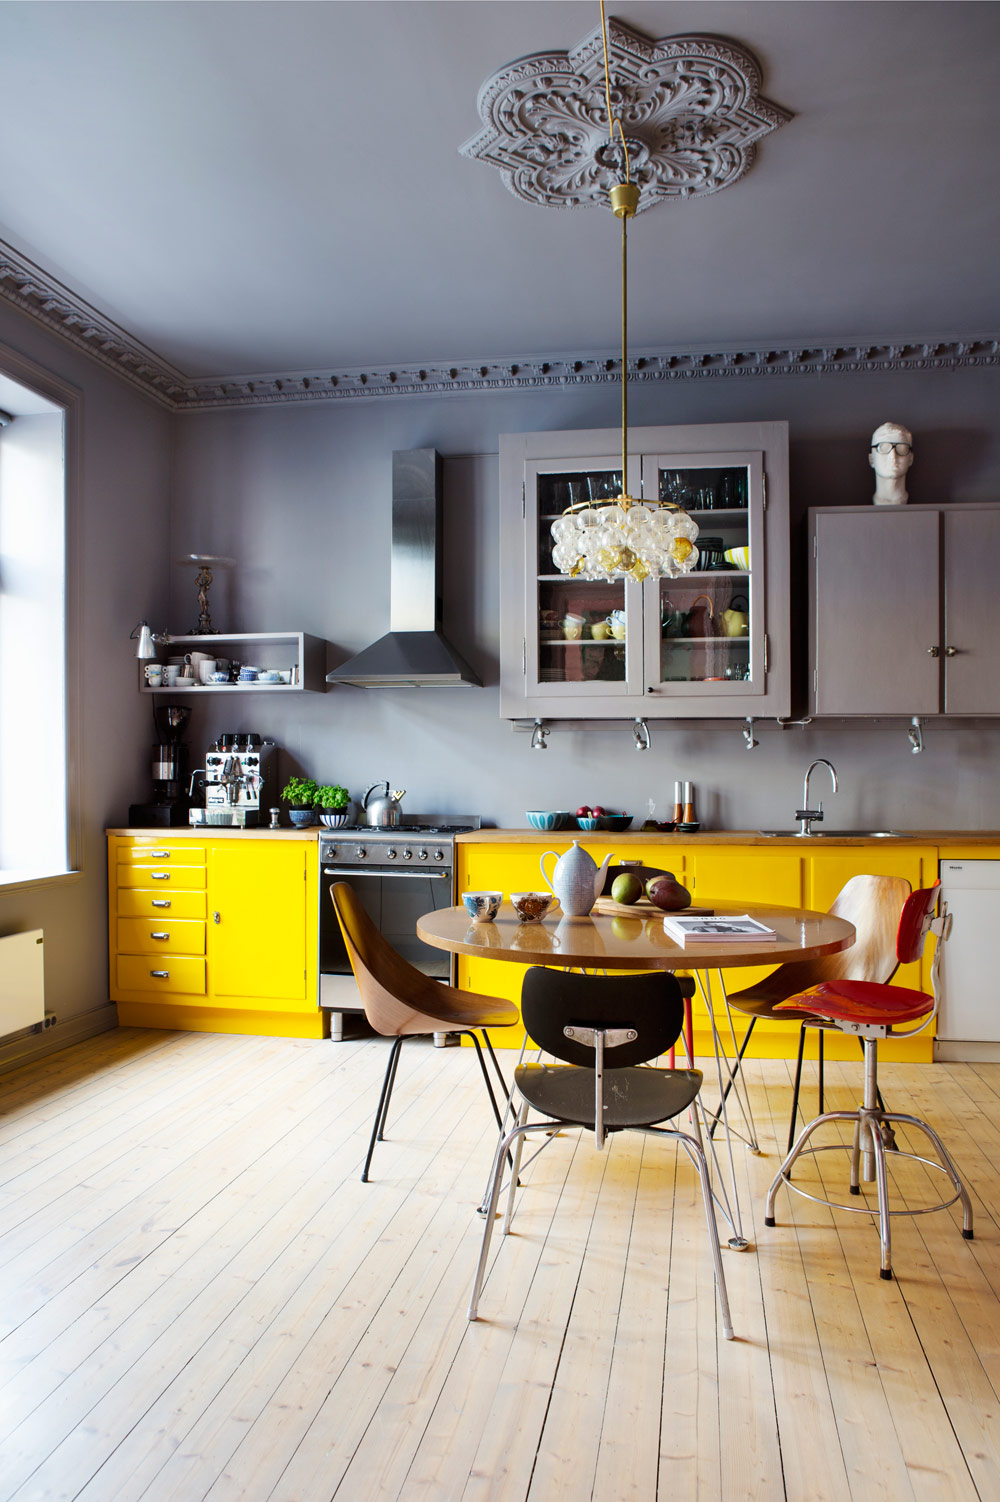 Colorful Kitchen With Yellow Cabinet Against Gray Walls